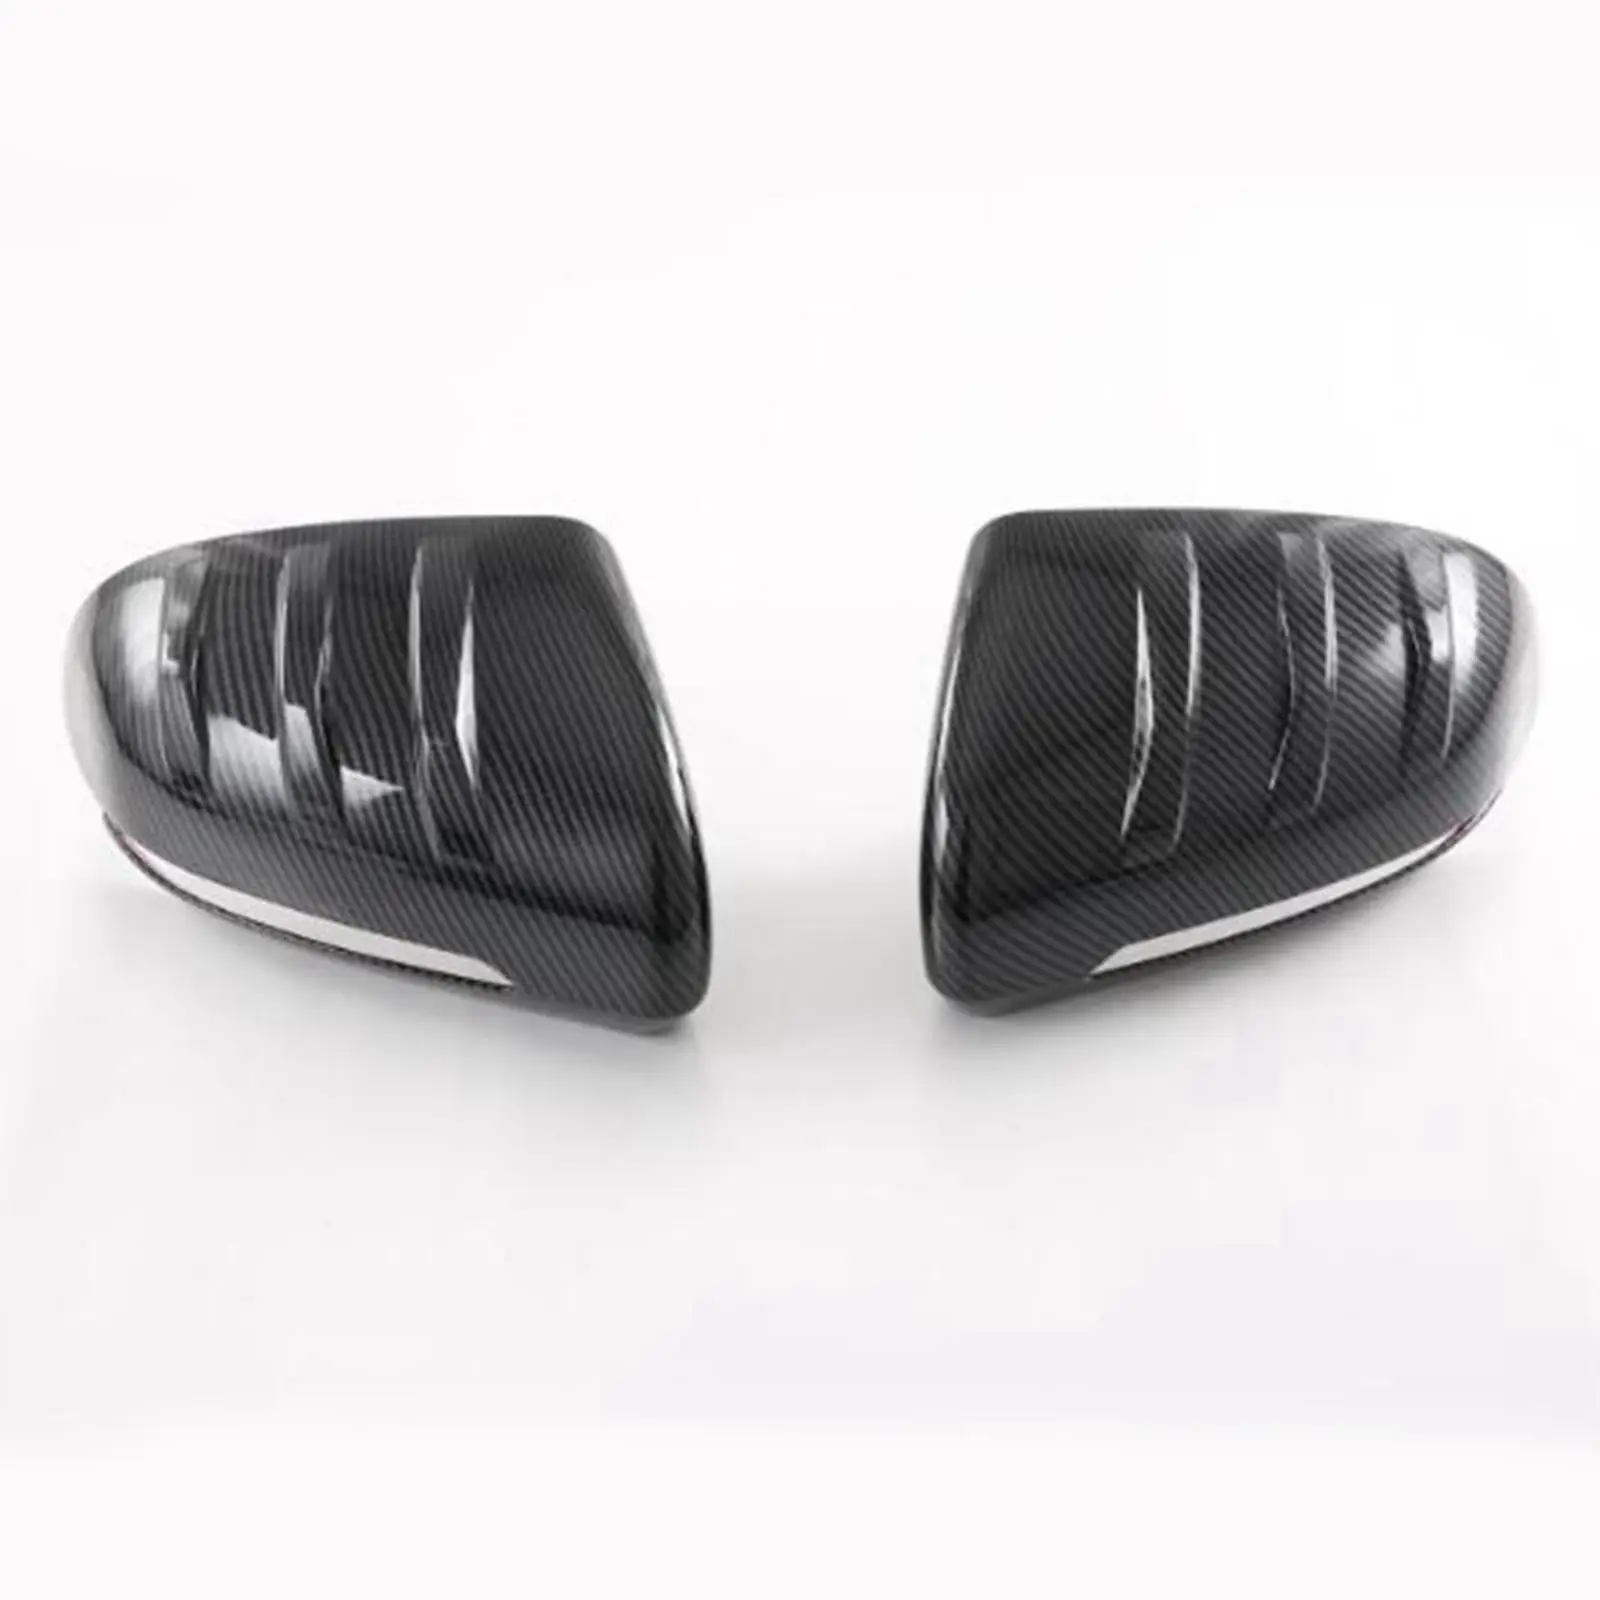 Rearview Mirror Cap Cover Trim External Decoration for Byd Atto 3 2022